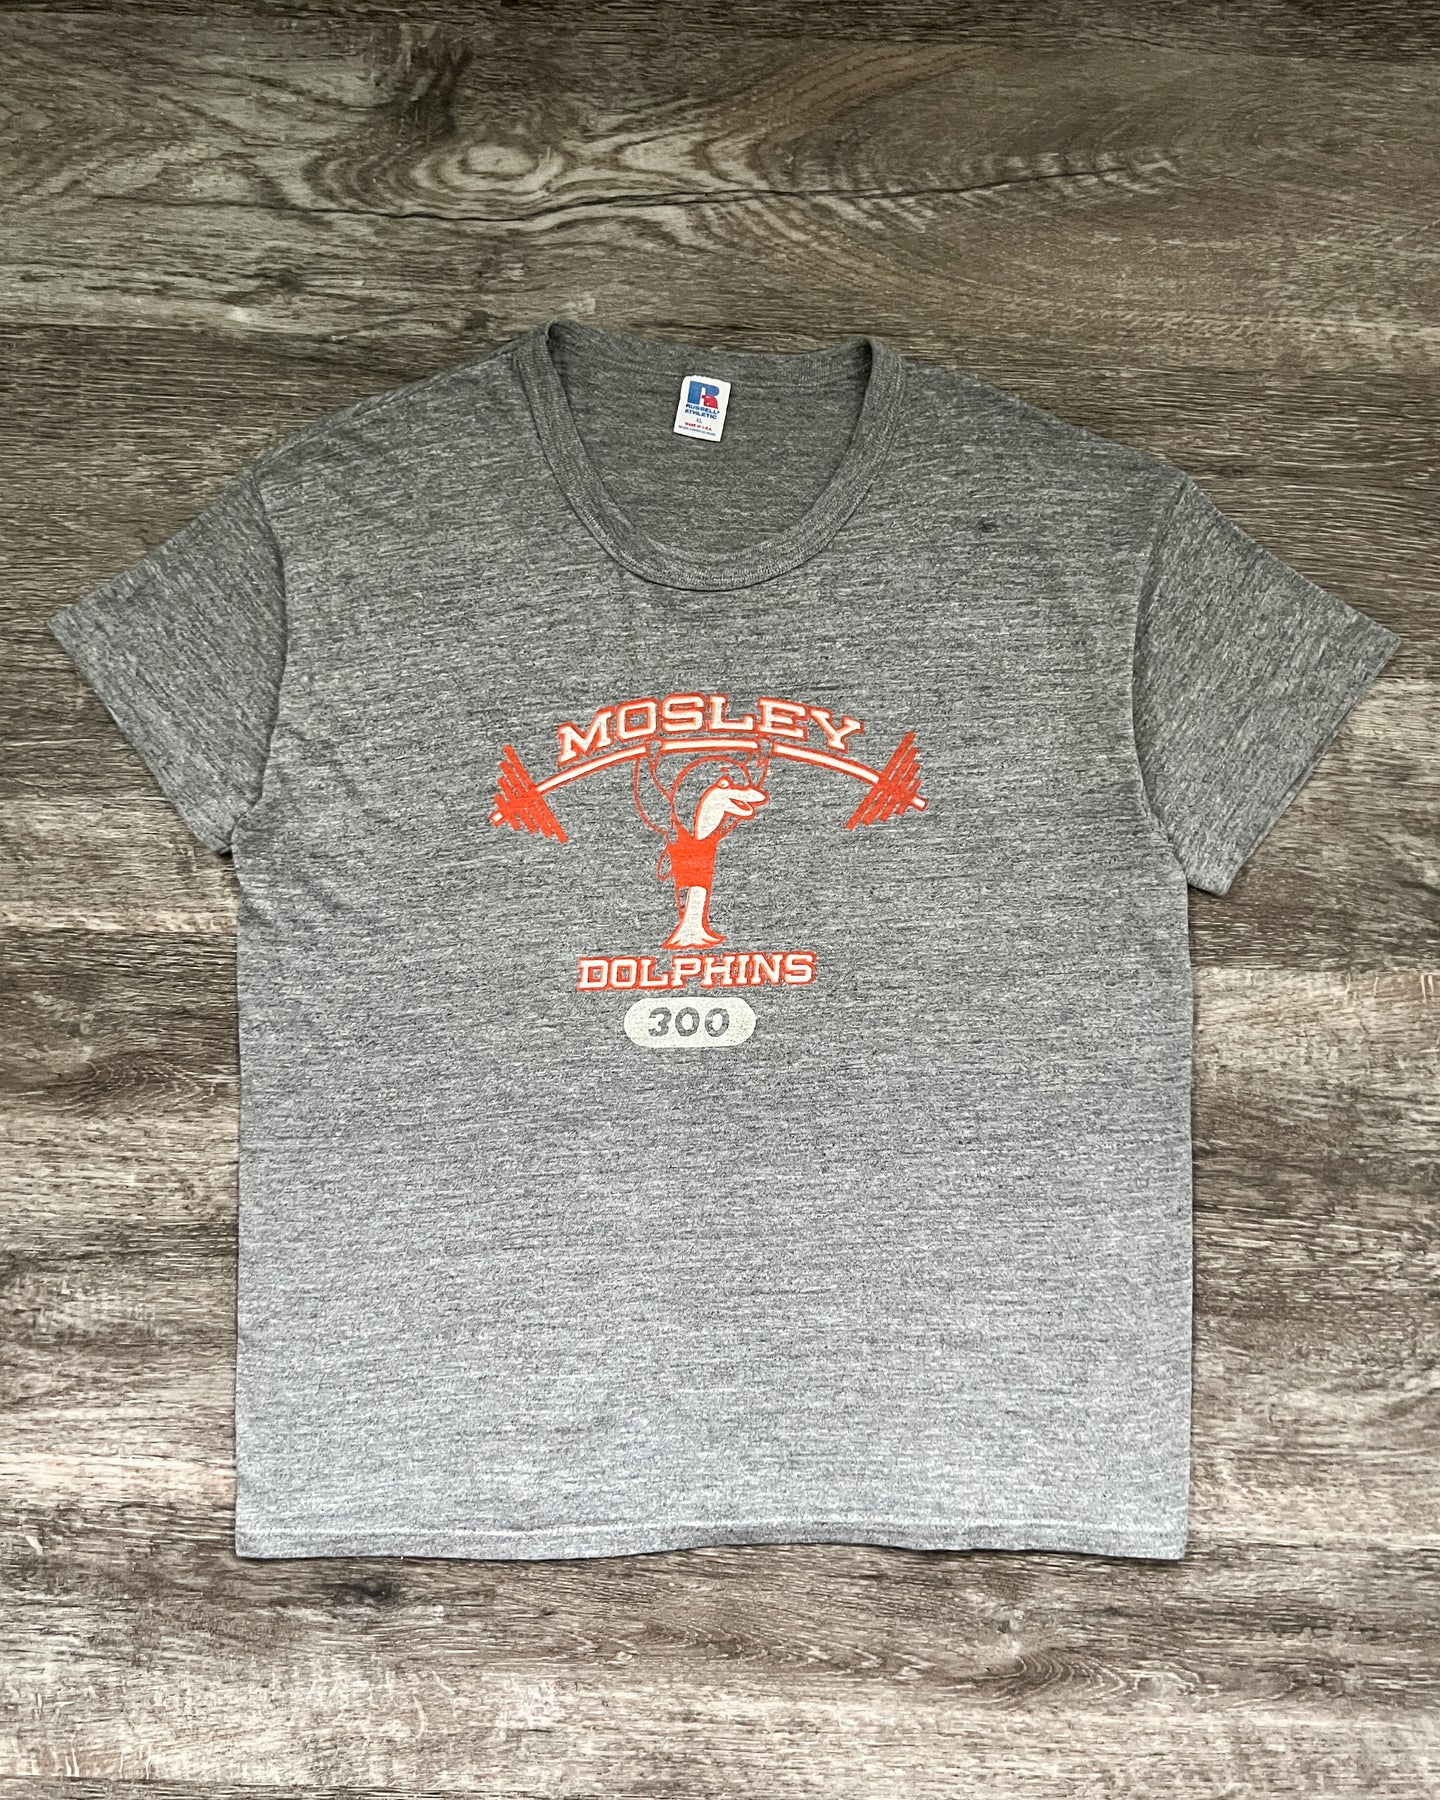 1990s Russell Athleric Mosley Dolphins Tri-Blend Single Stitch Tee - Size X-Large